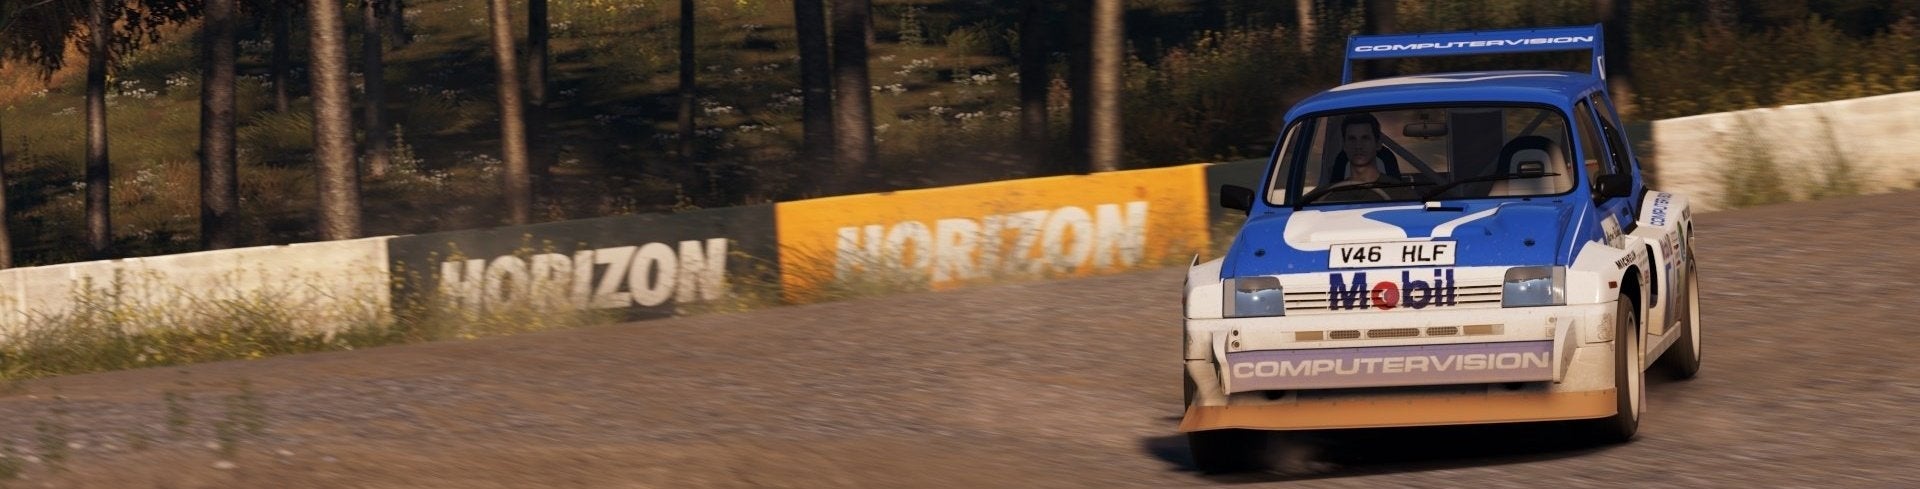 Image for Forza Horizon 2 Storm Island review